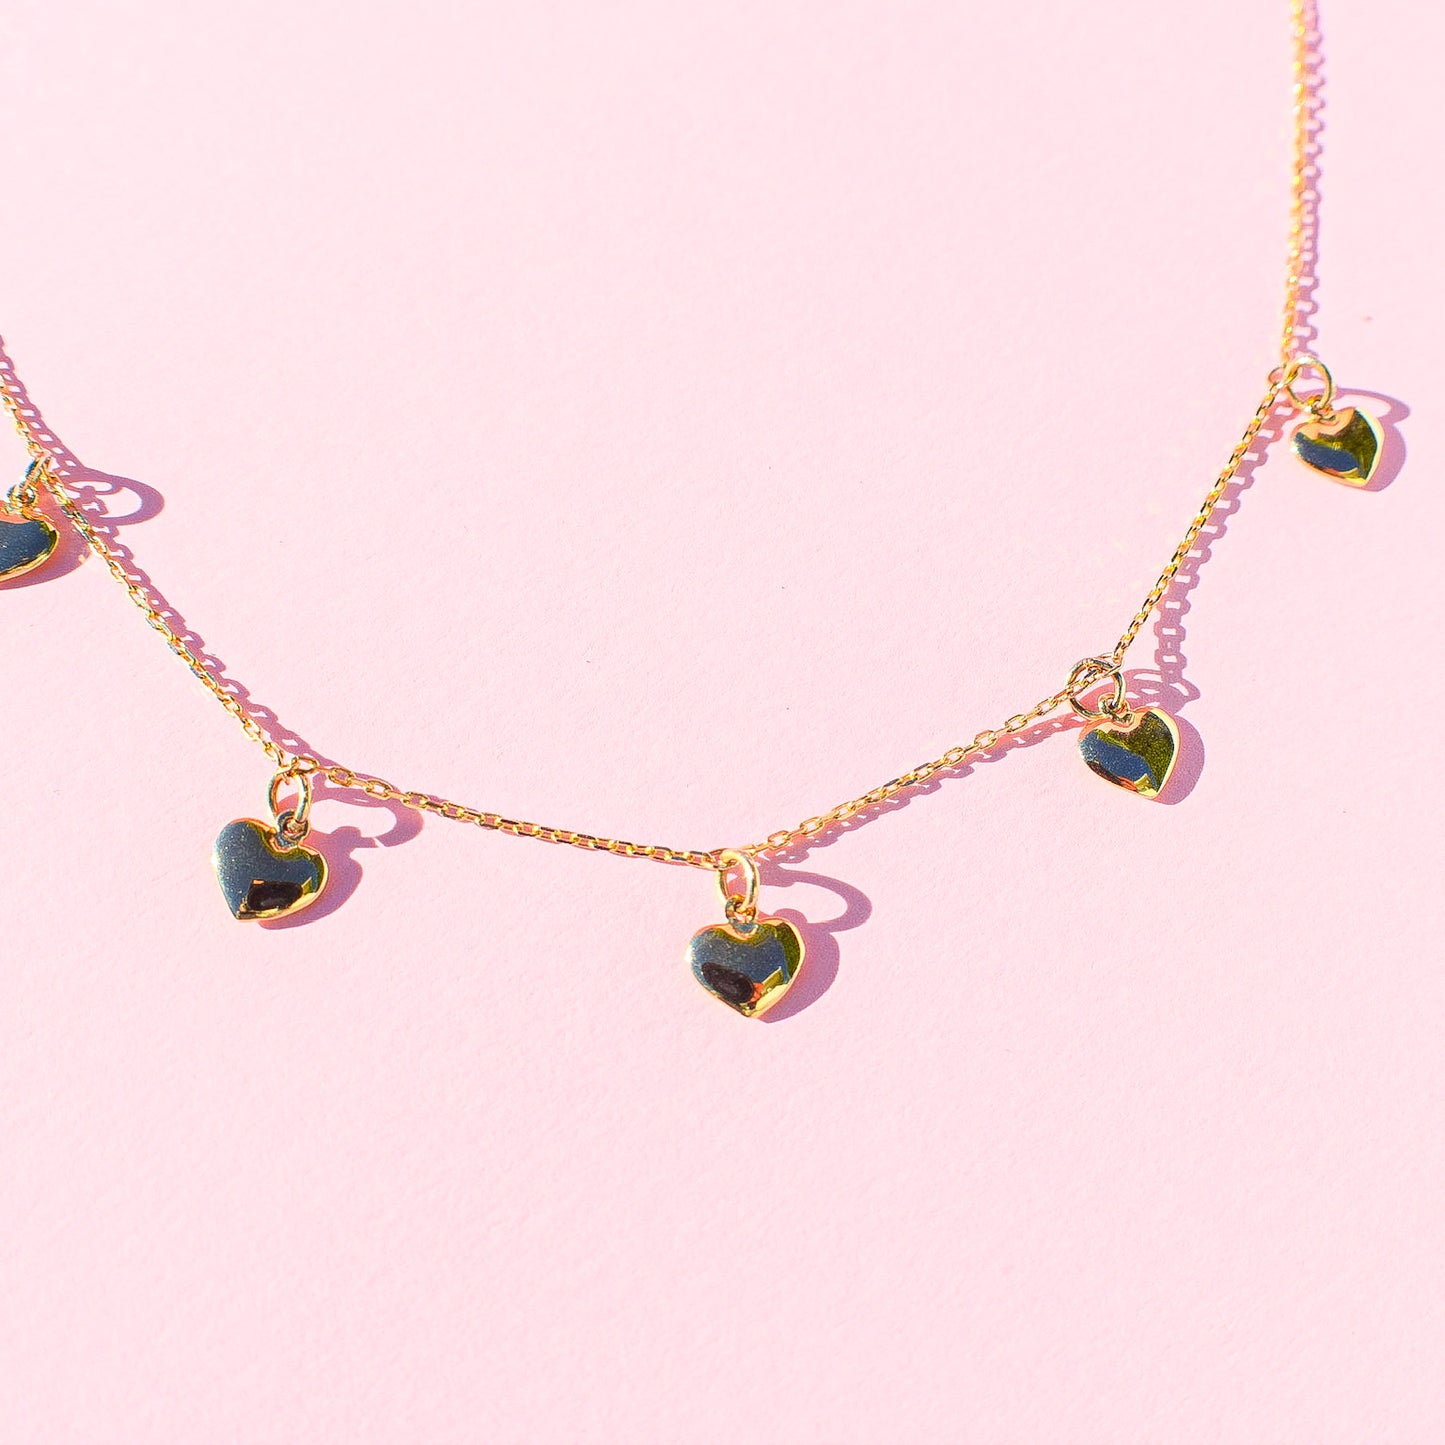 5 Dangle Hearts Necklace